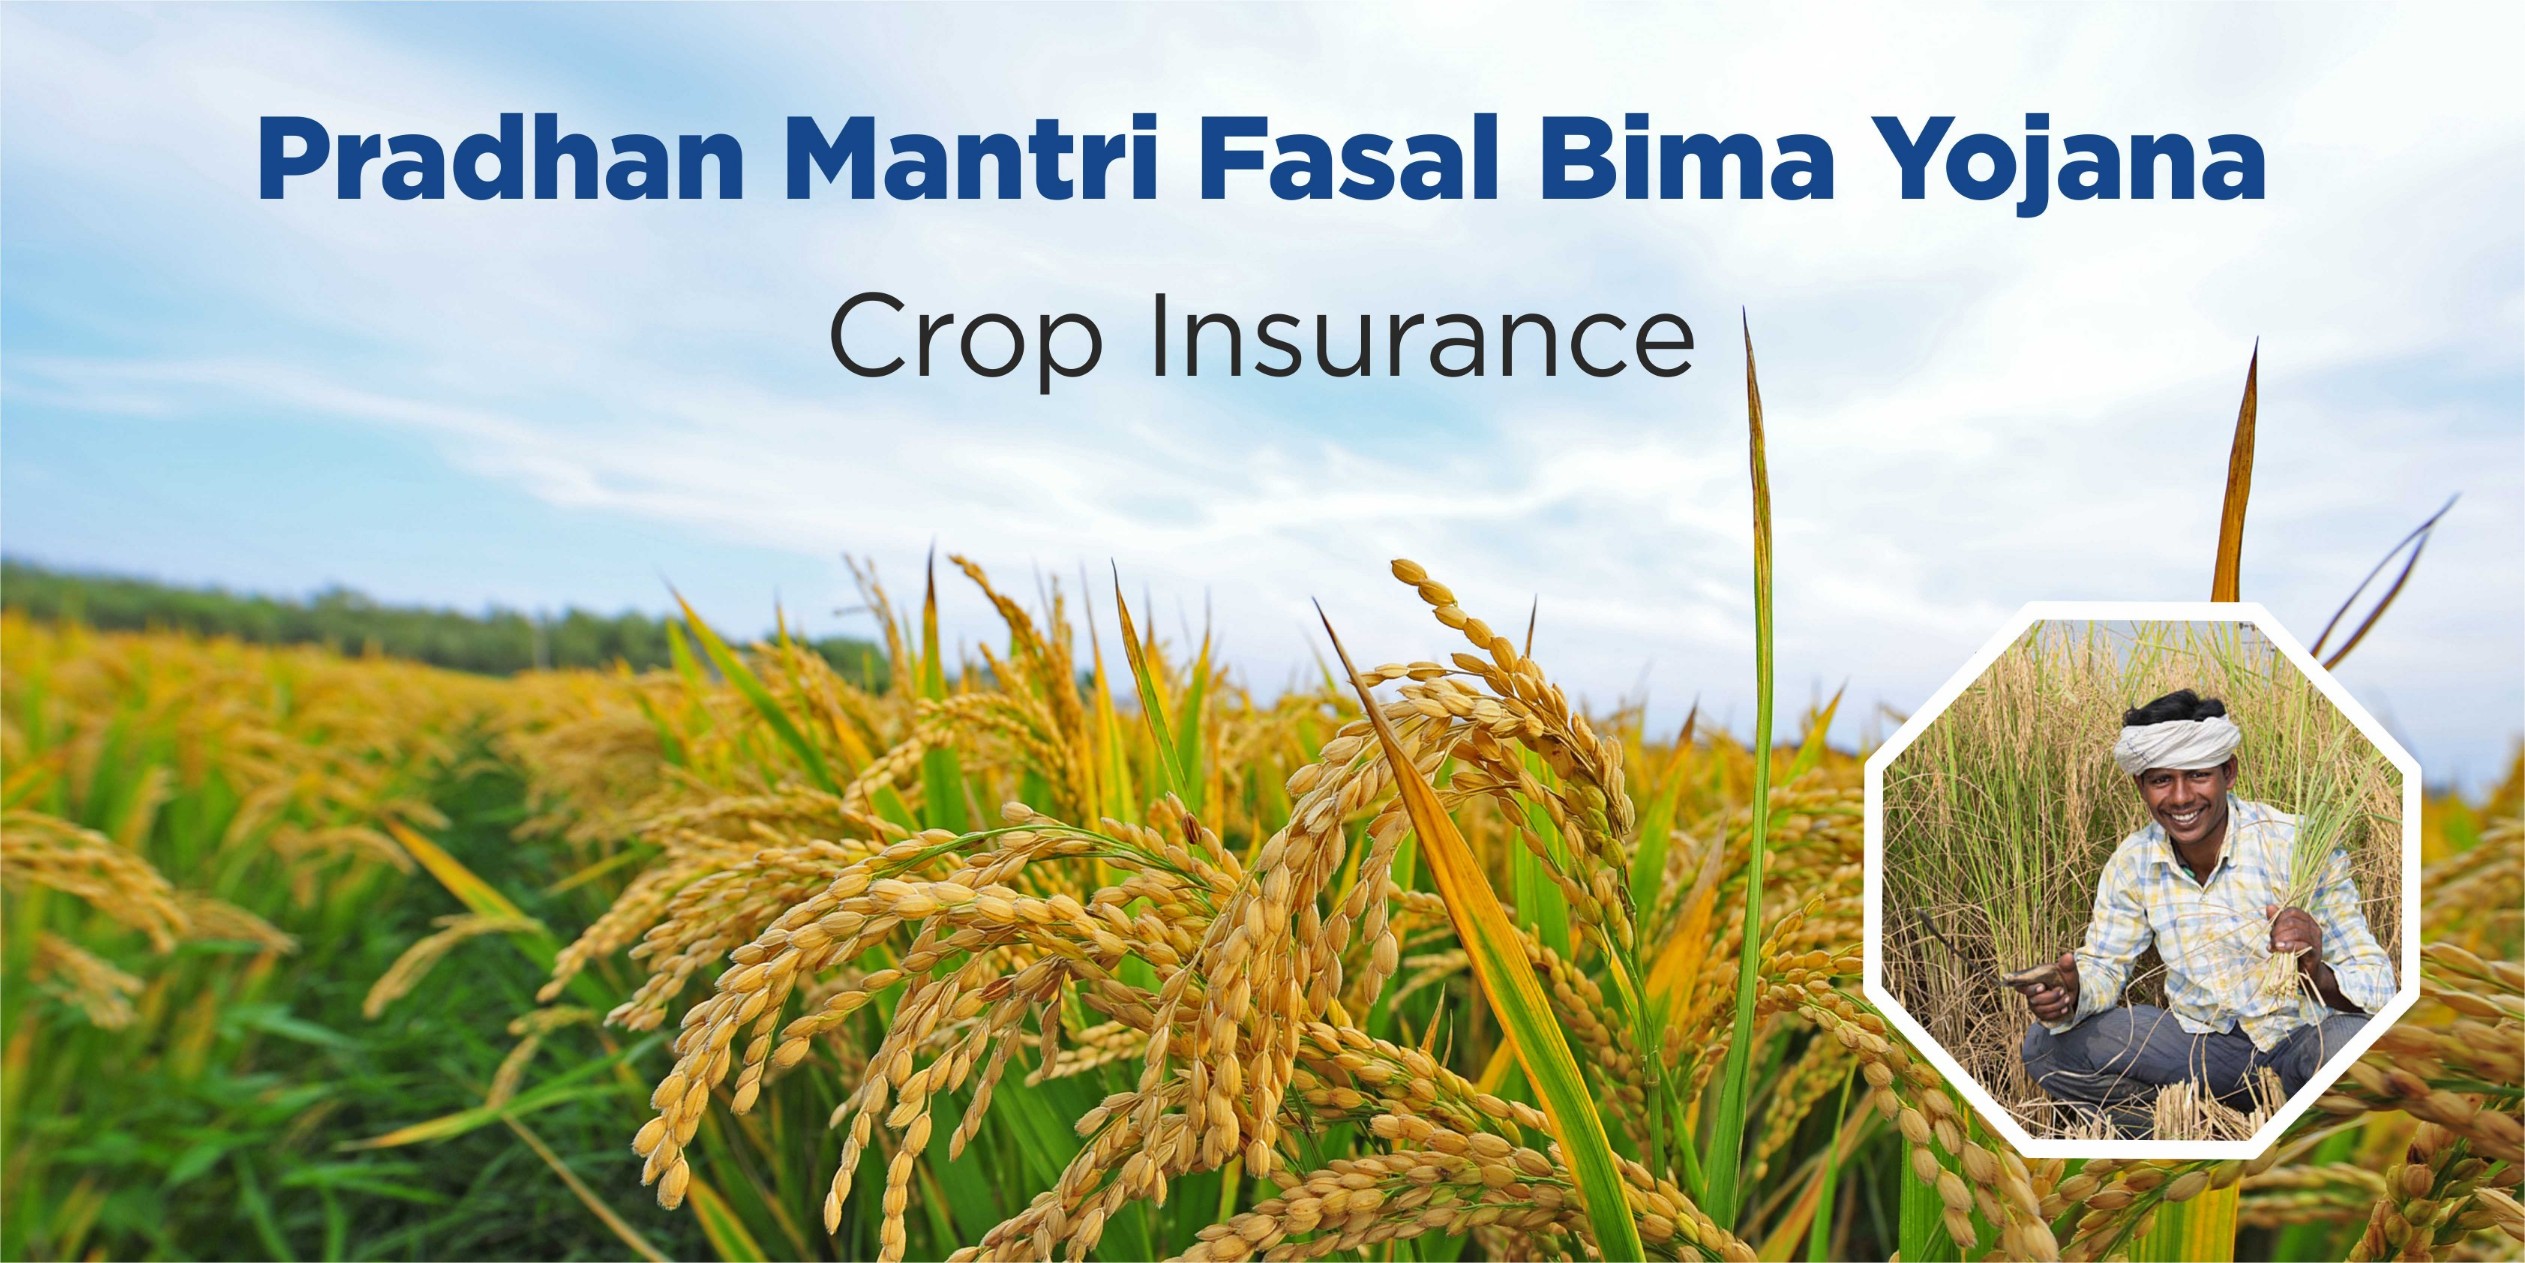 Centre sets up 7-member GoM led by Rajnath singh to review crop insurance scheme-PMFBY